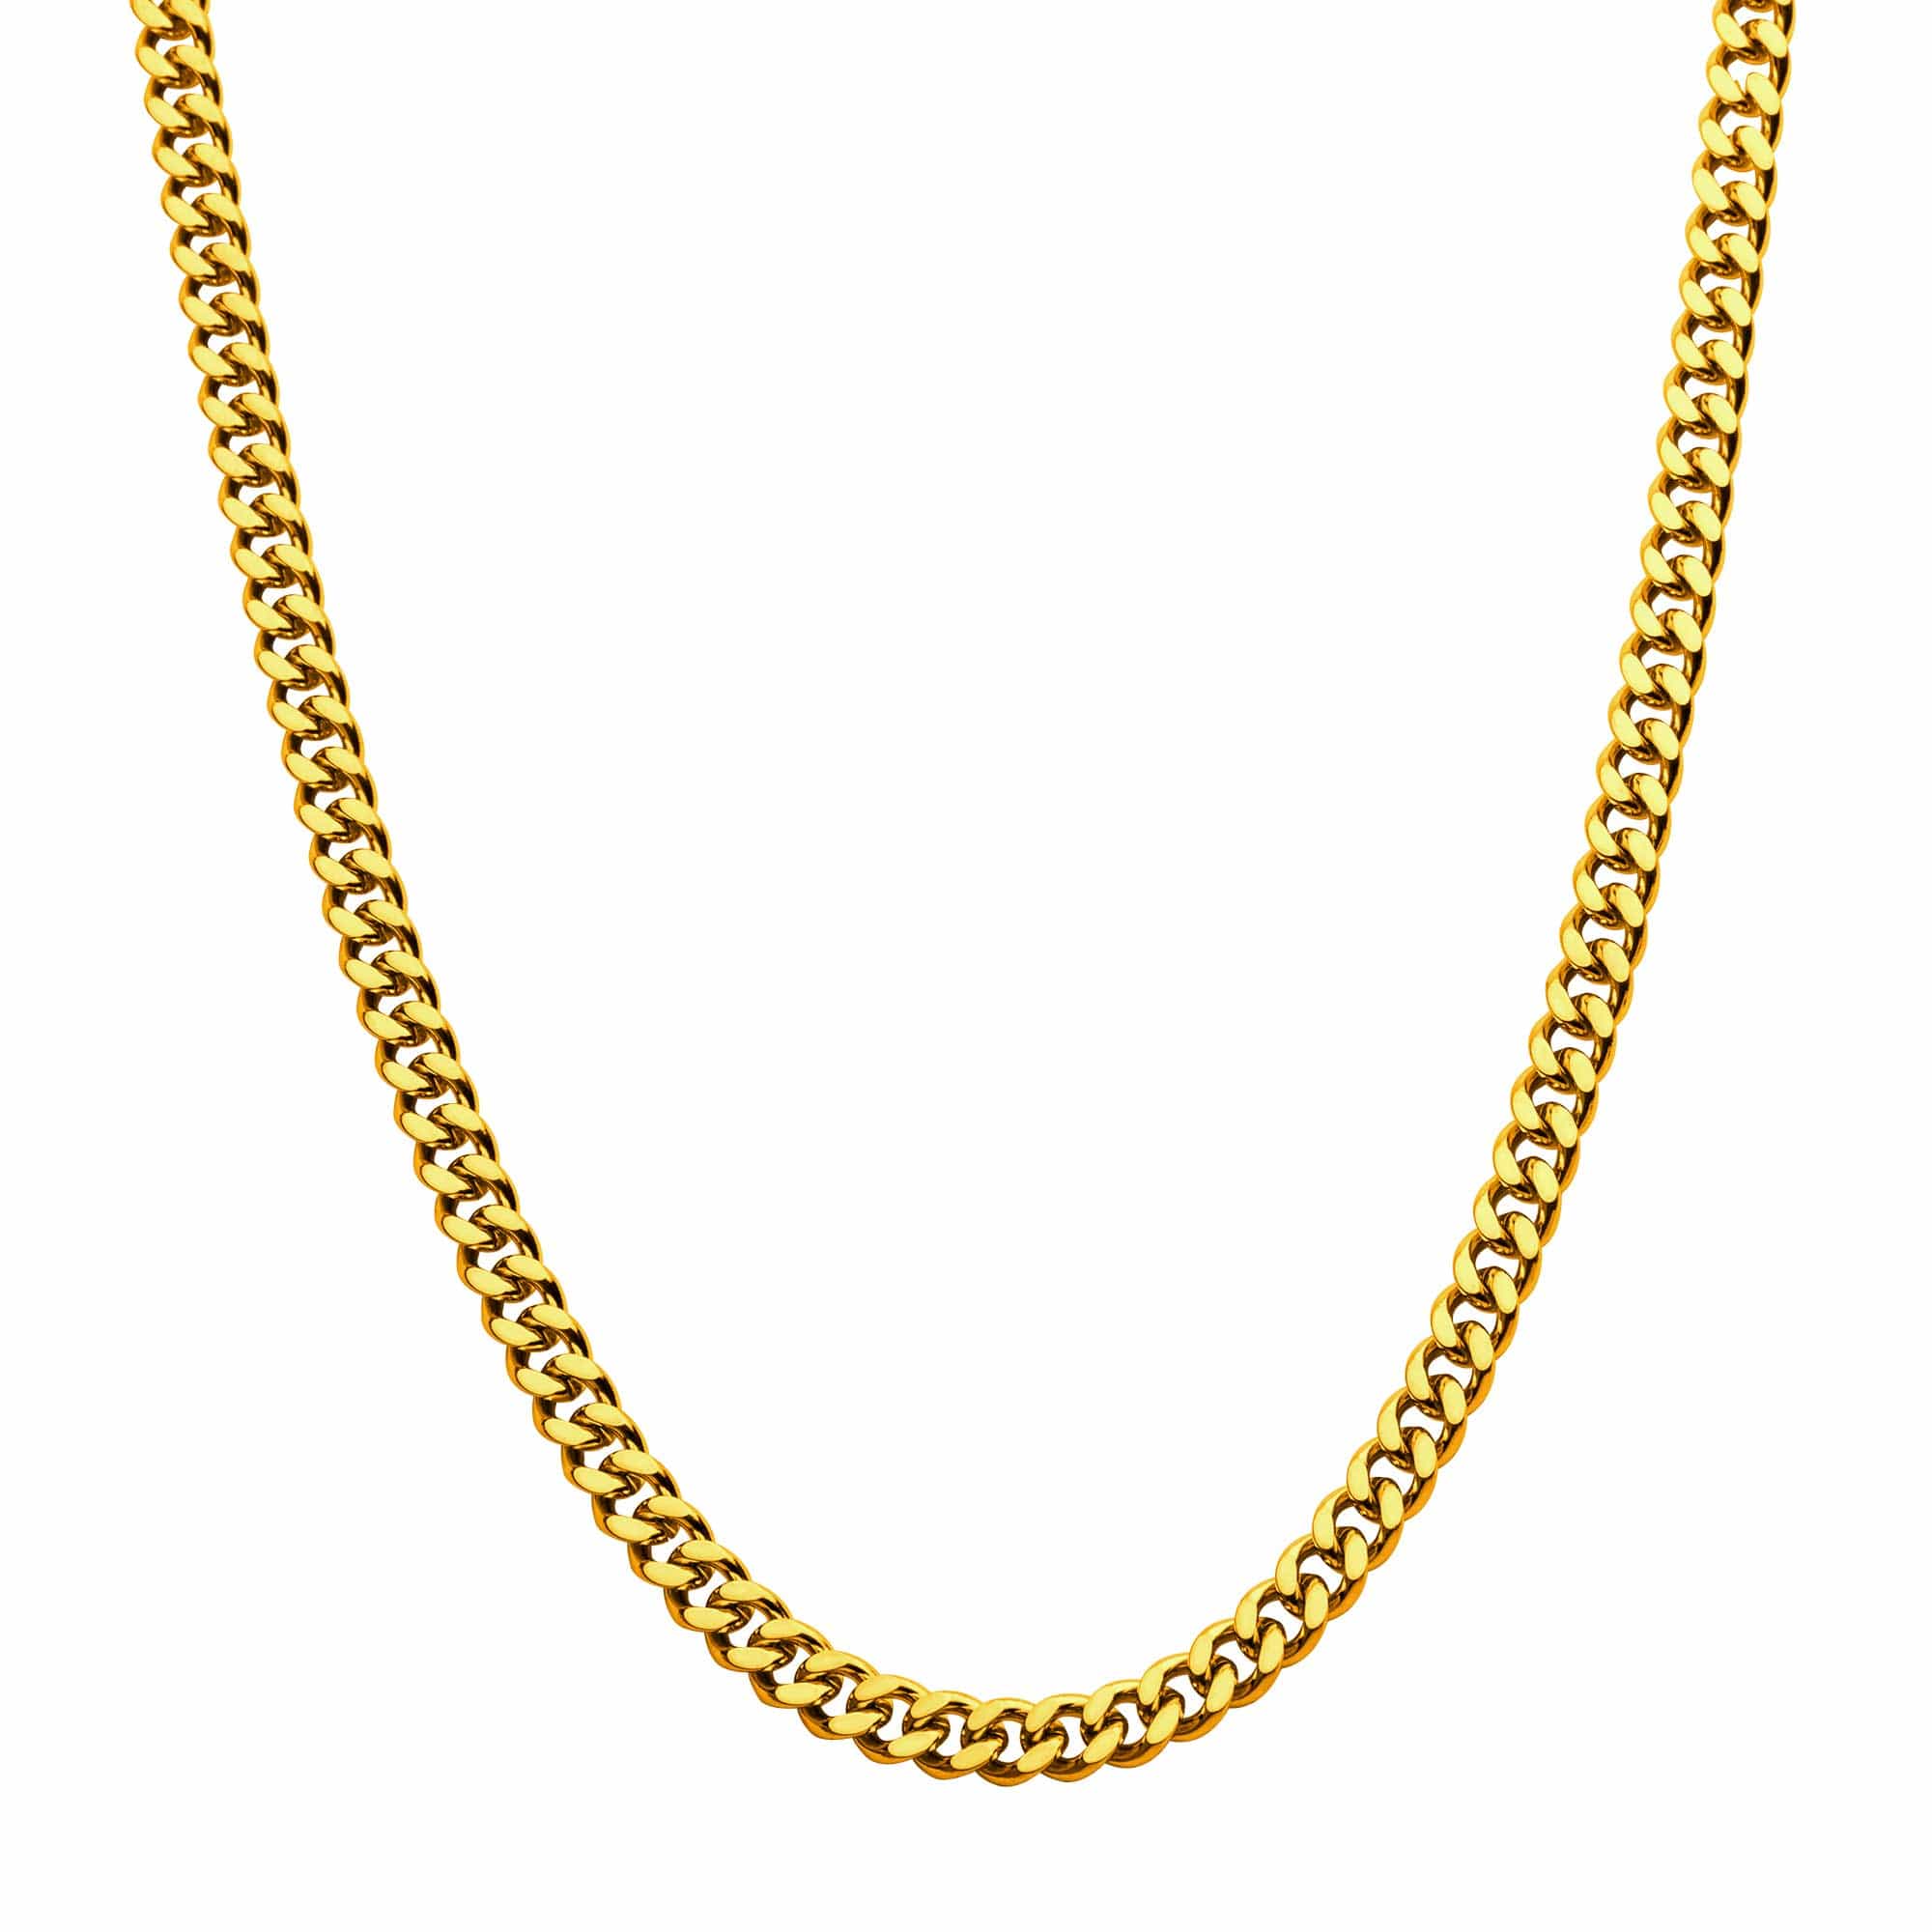 INOX JEWELRY Chains 18K Gold Ion Plated Stainless Steel 4mm Diamond Cut Curb Chain